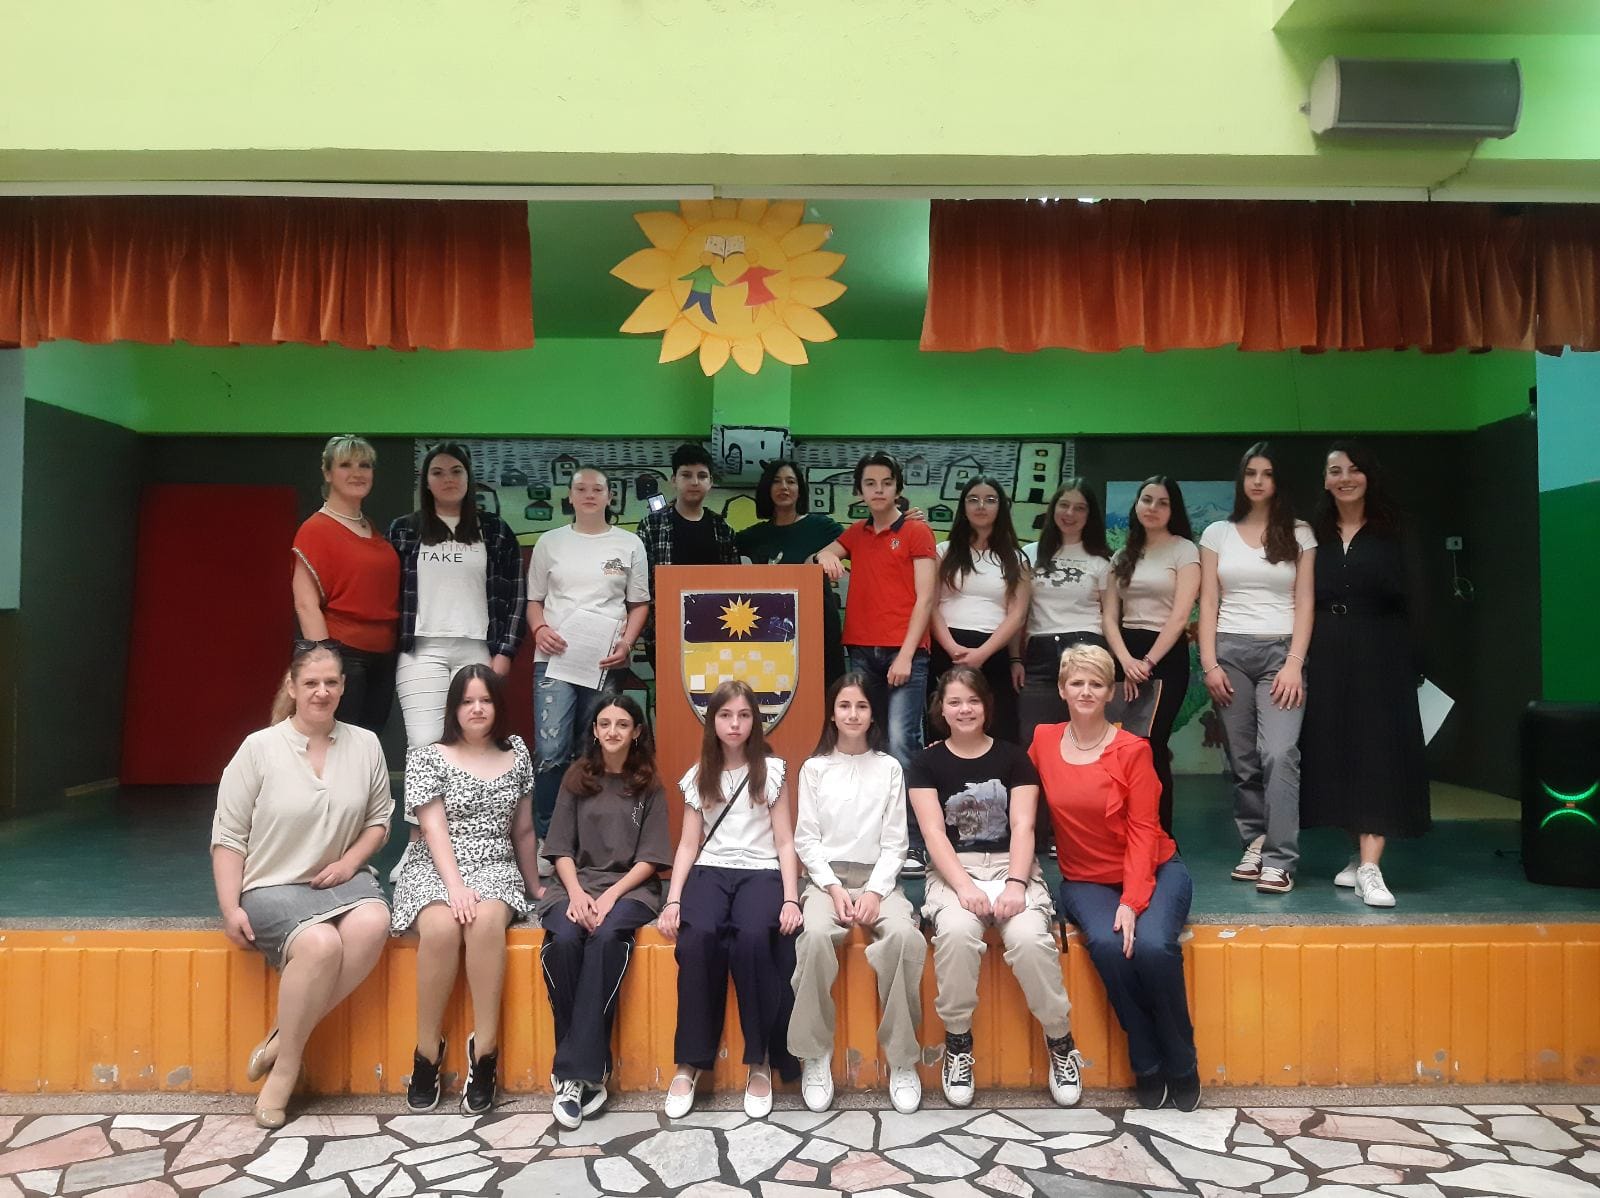 A group photo of the students with the school's Director